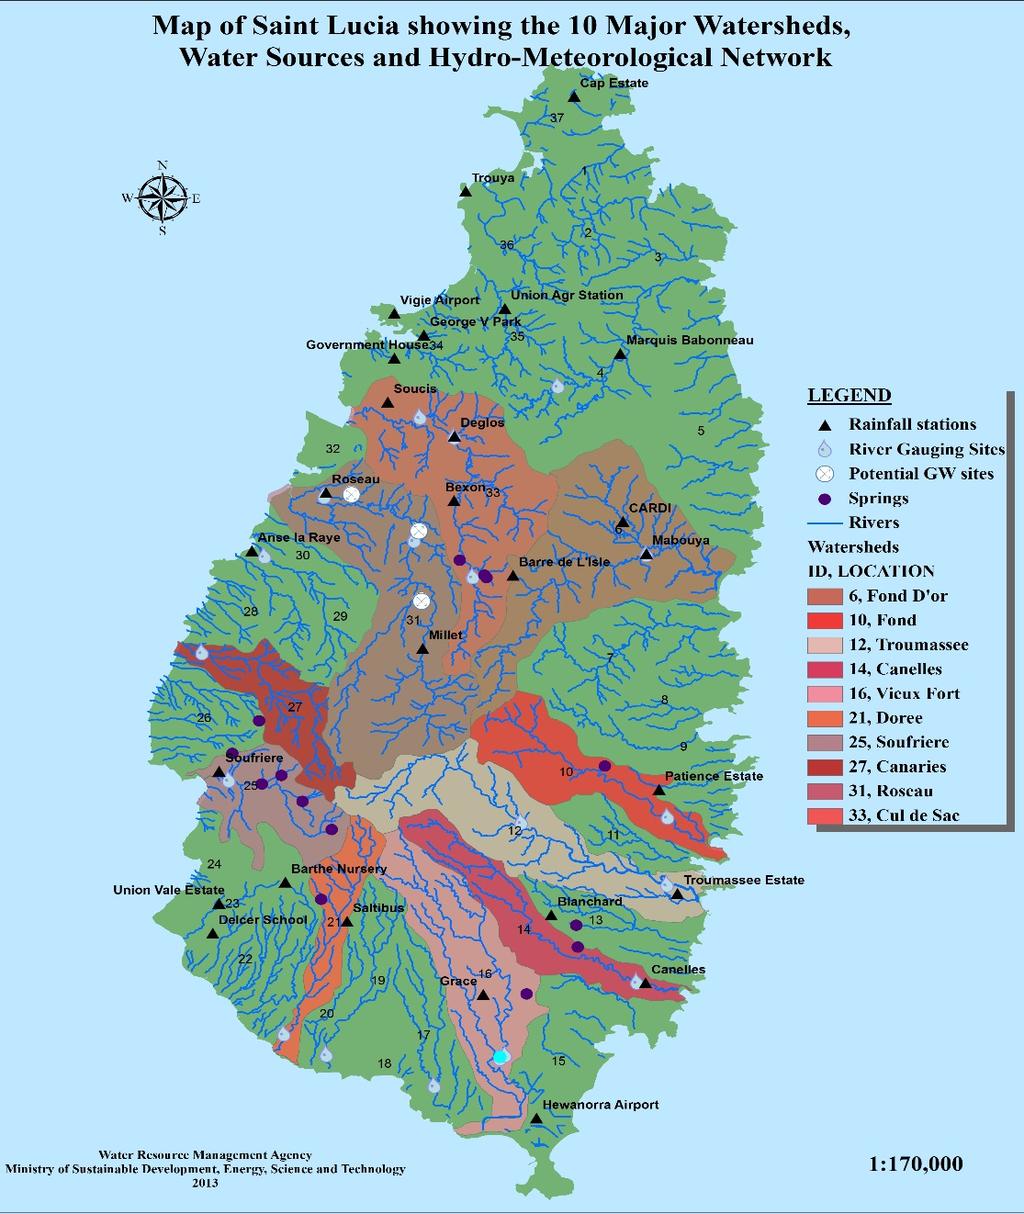 WATER RESOURCES OF SAINT LUCIA 37 watersheds- rugged mountainous upper watershed areas to low lying coastal areas 28